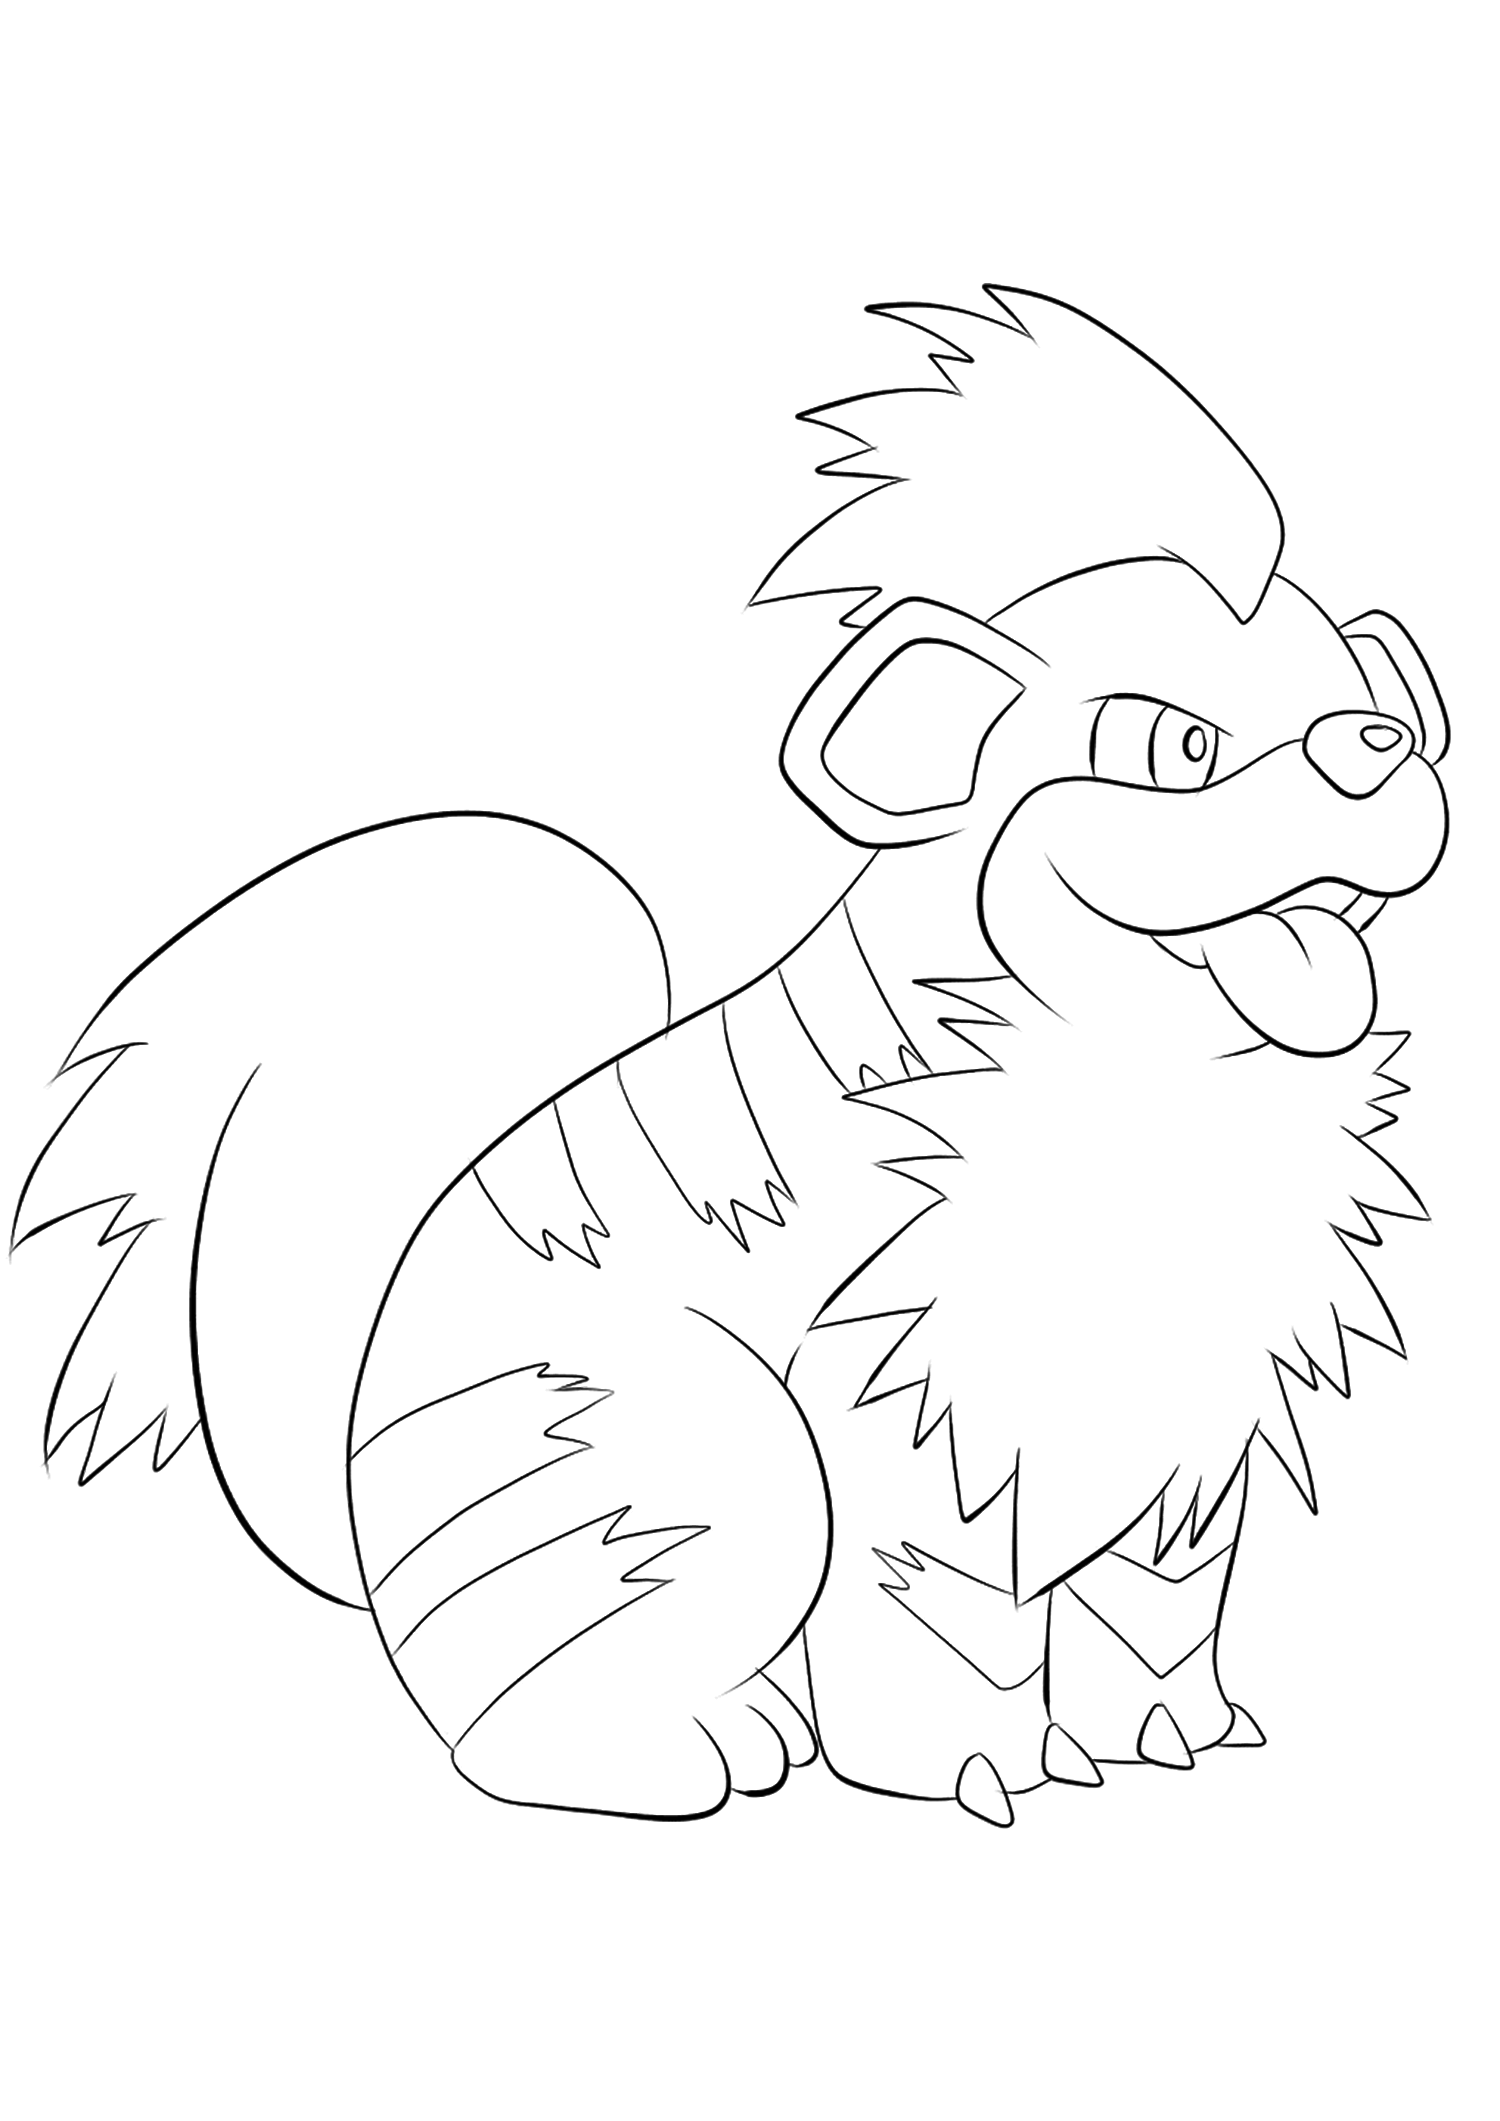 Caninos (No.58). Coloriage de Caninos (Growlithe), Pokémon de Génération I, de type : FeuOriginal image credit: Pokemon linearts by Lilly Gerbil on Deviantart.Permission:  All rights reserved © Pokemon company and Ken Sugimori.